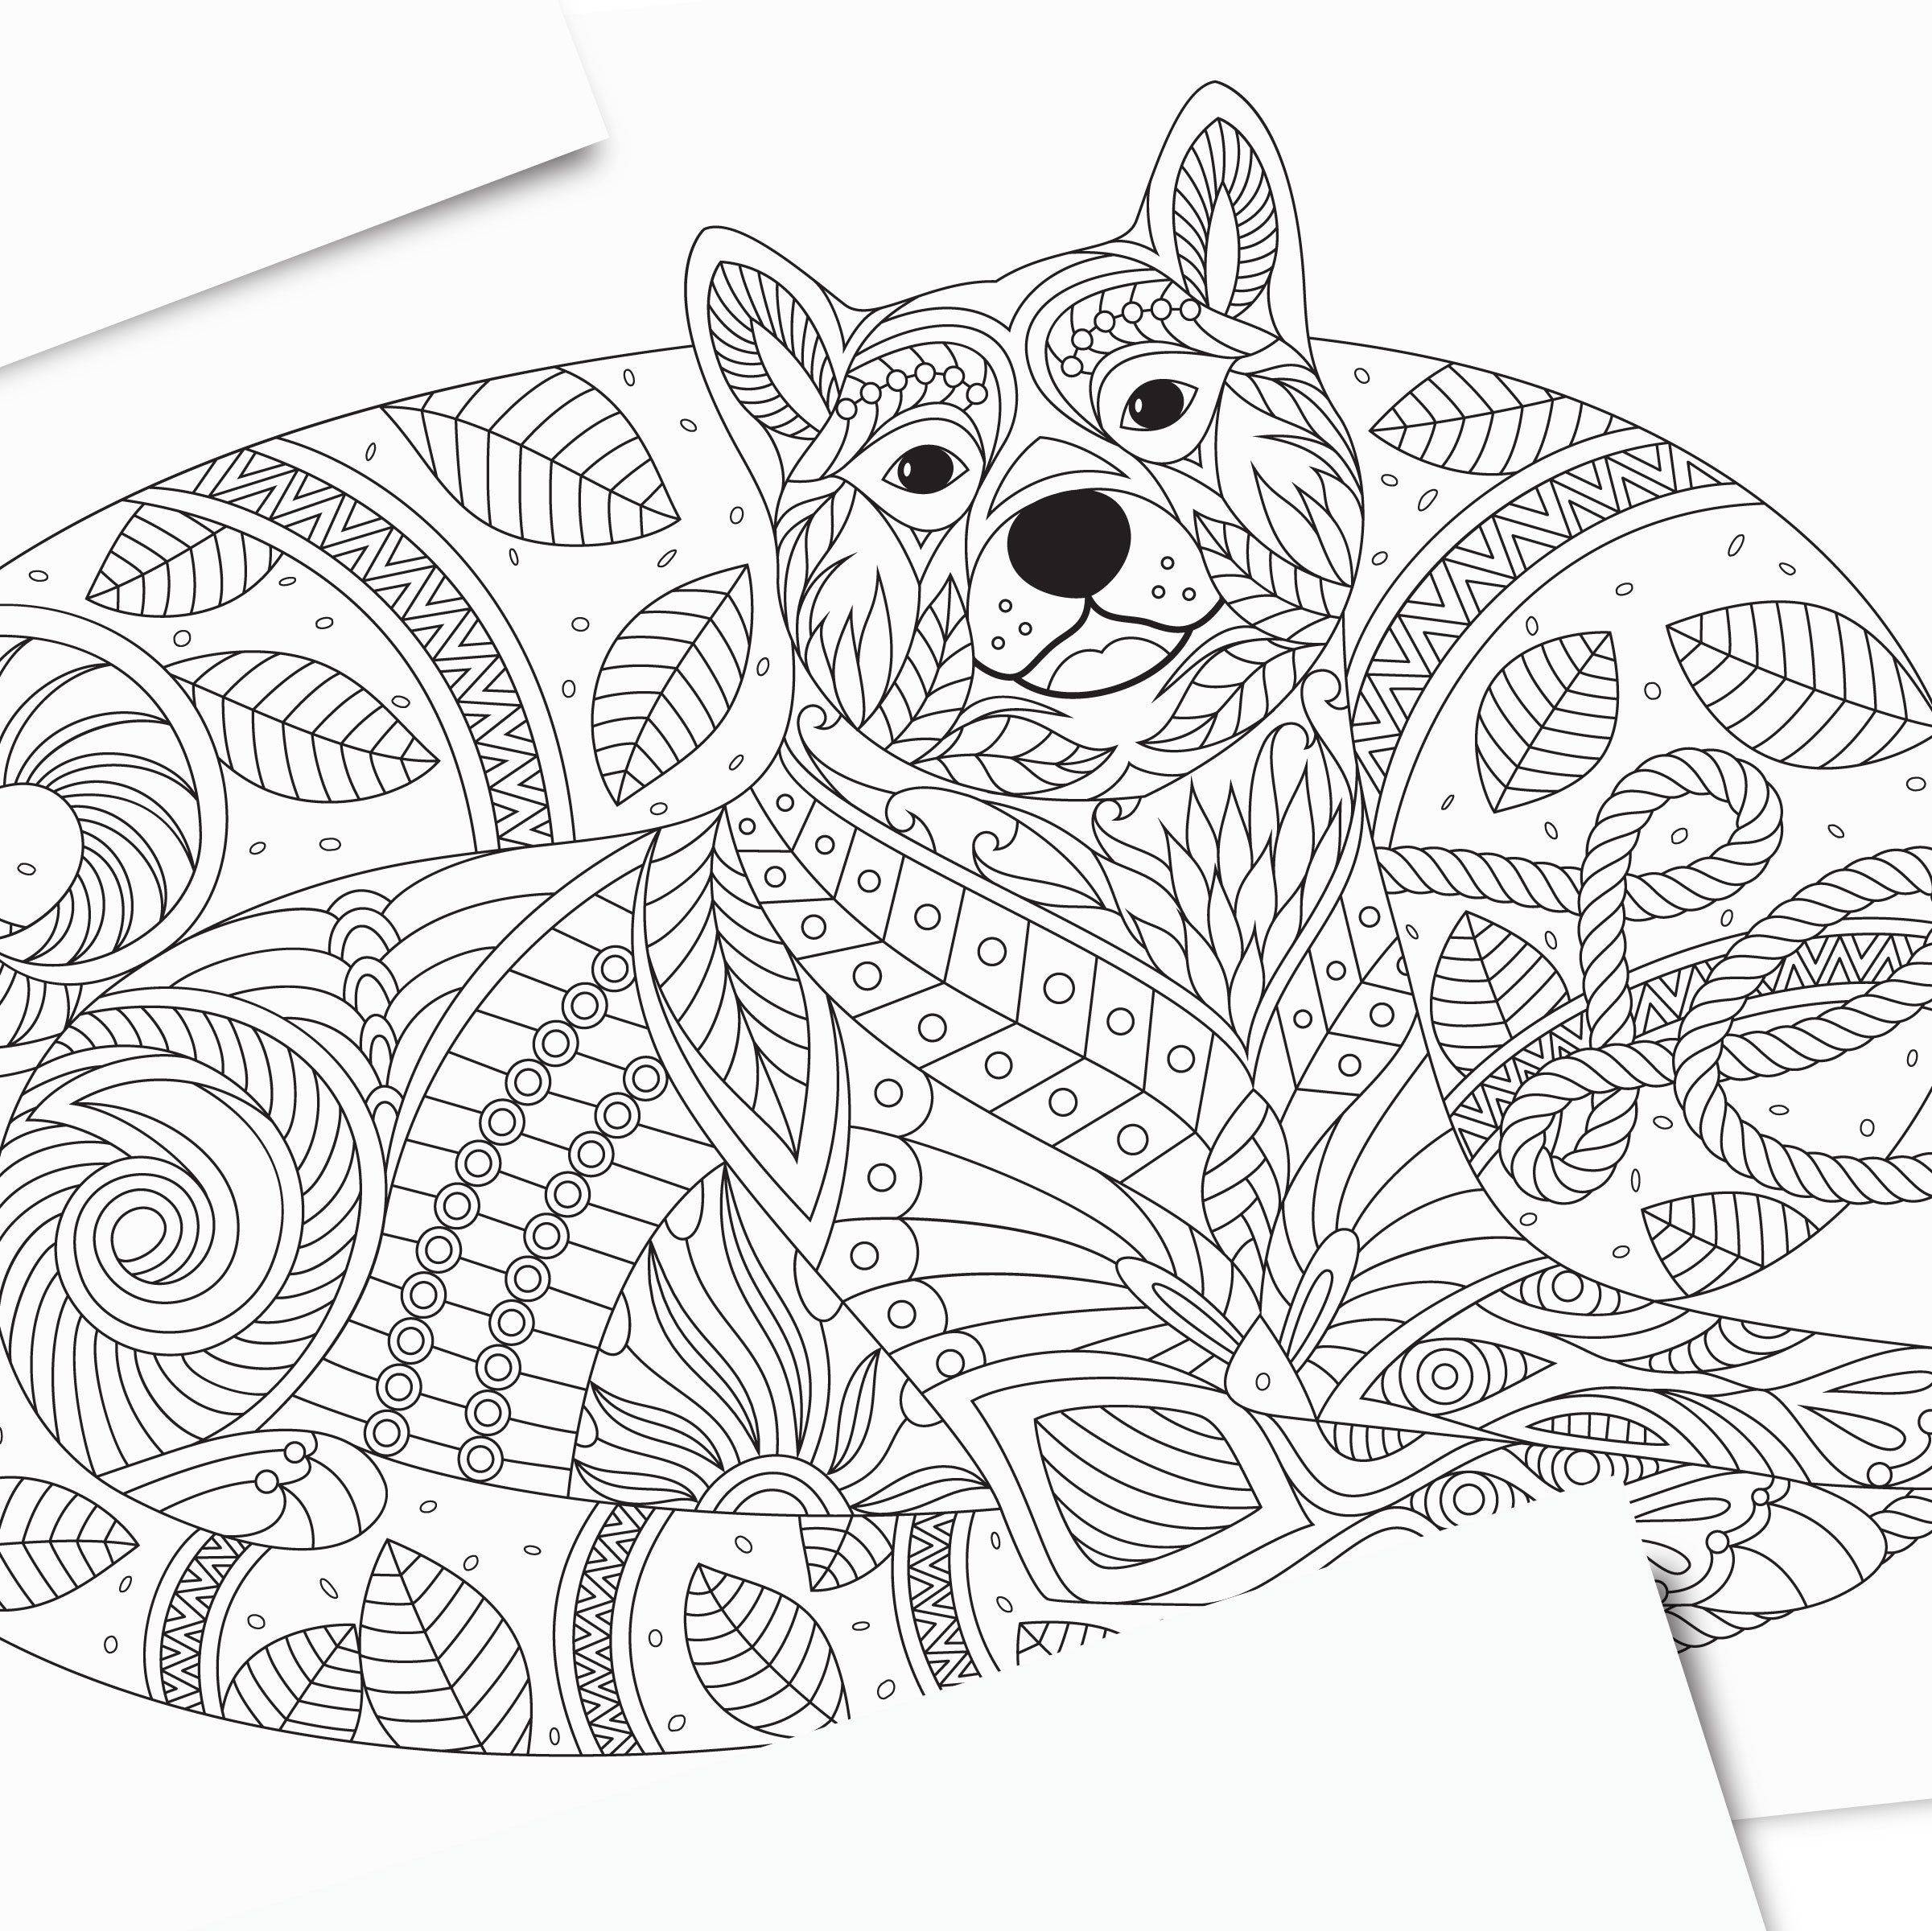 Dog Coloring Page for Adults and ...